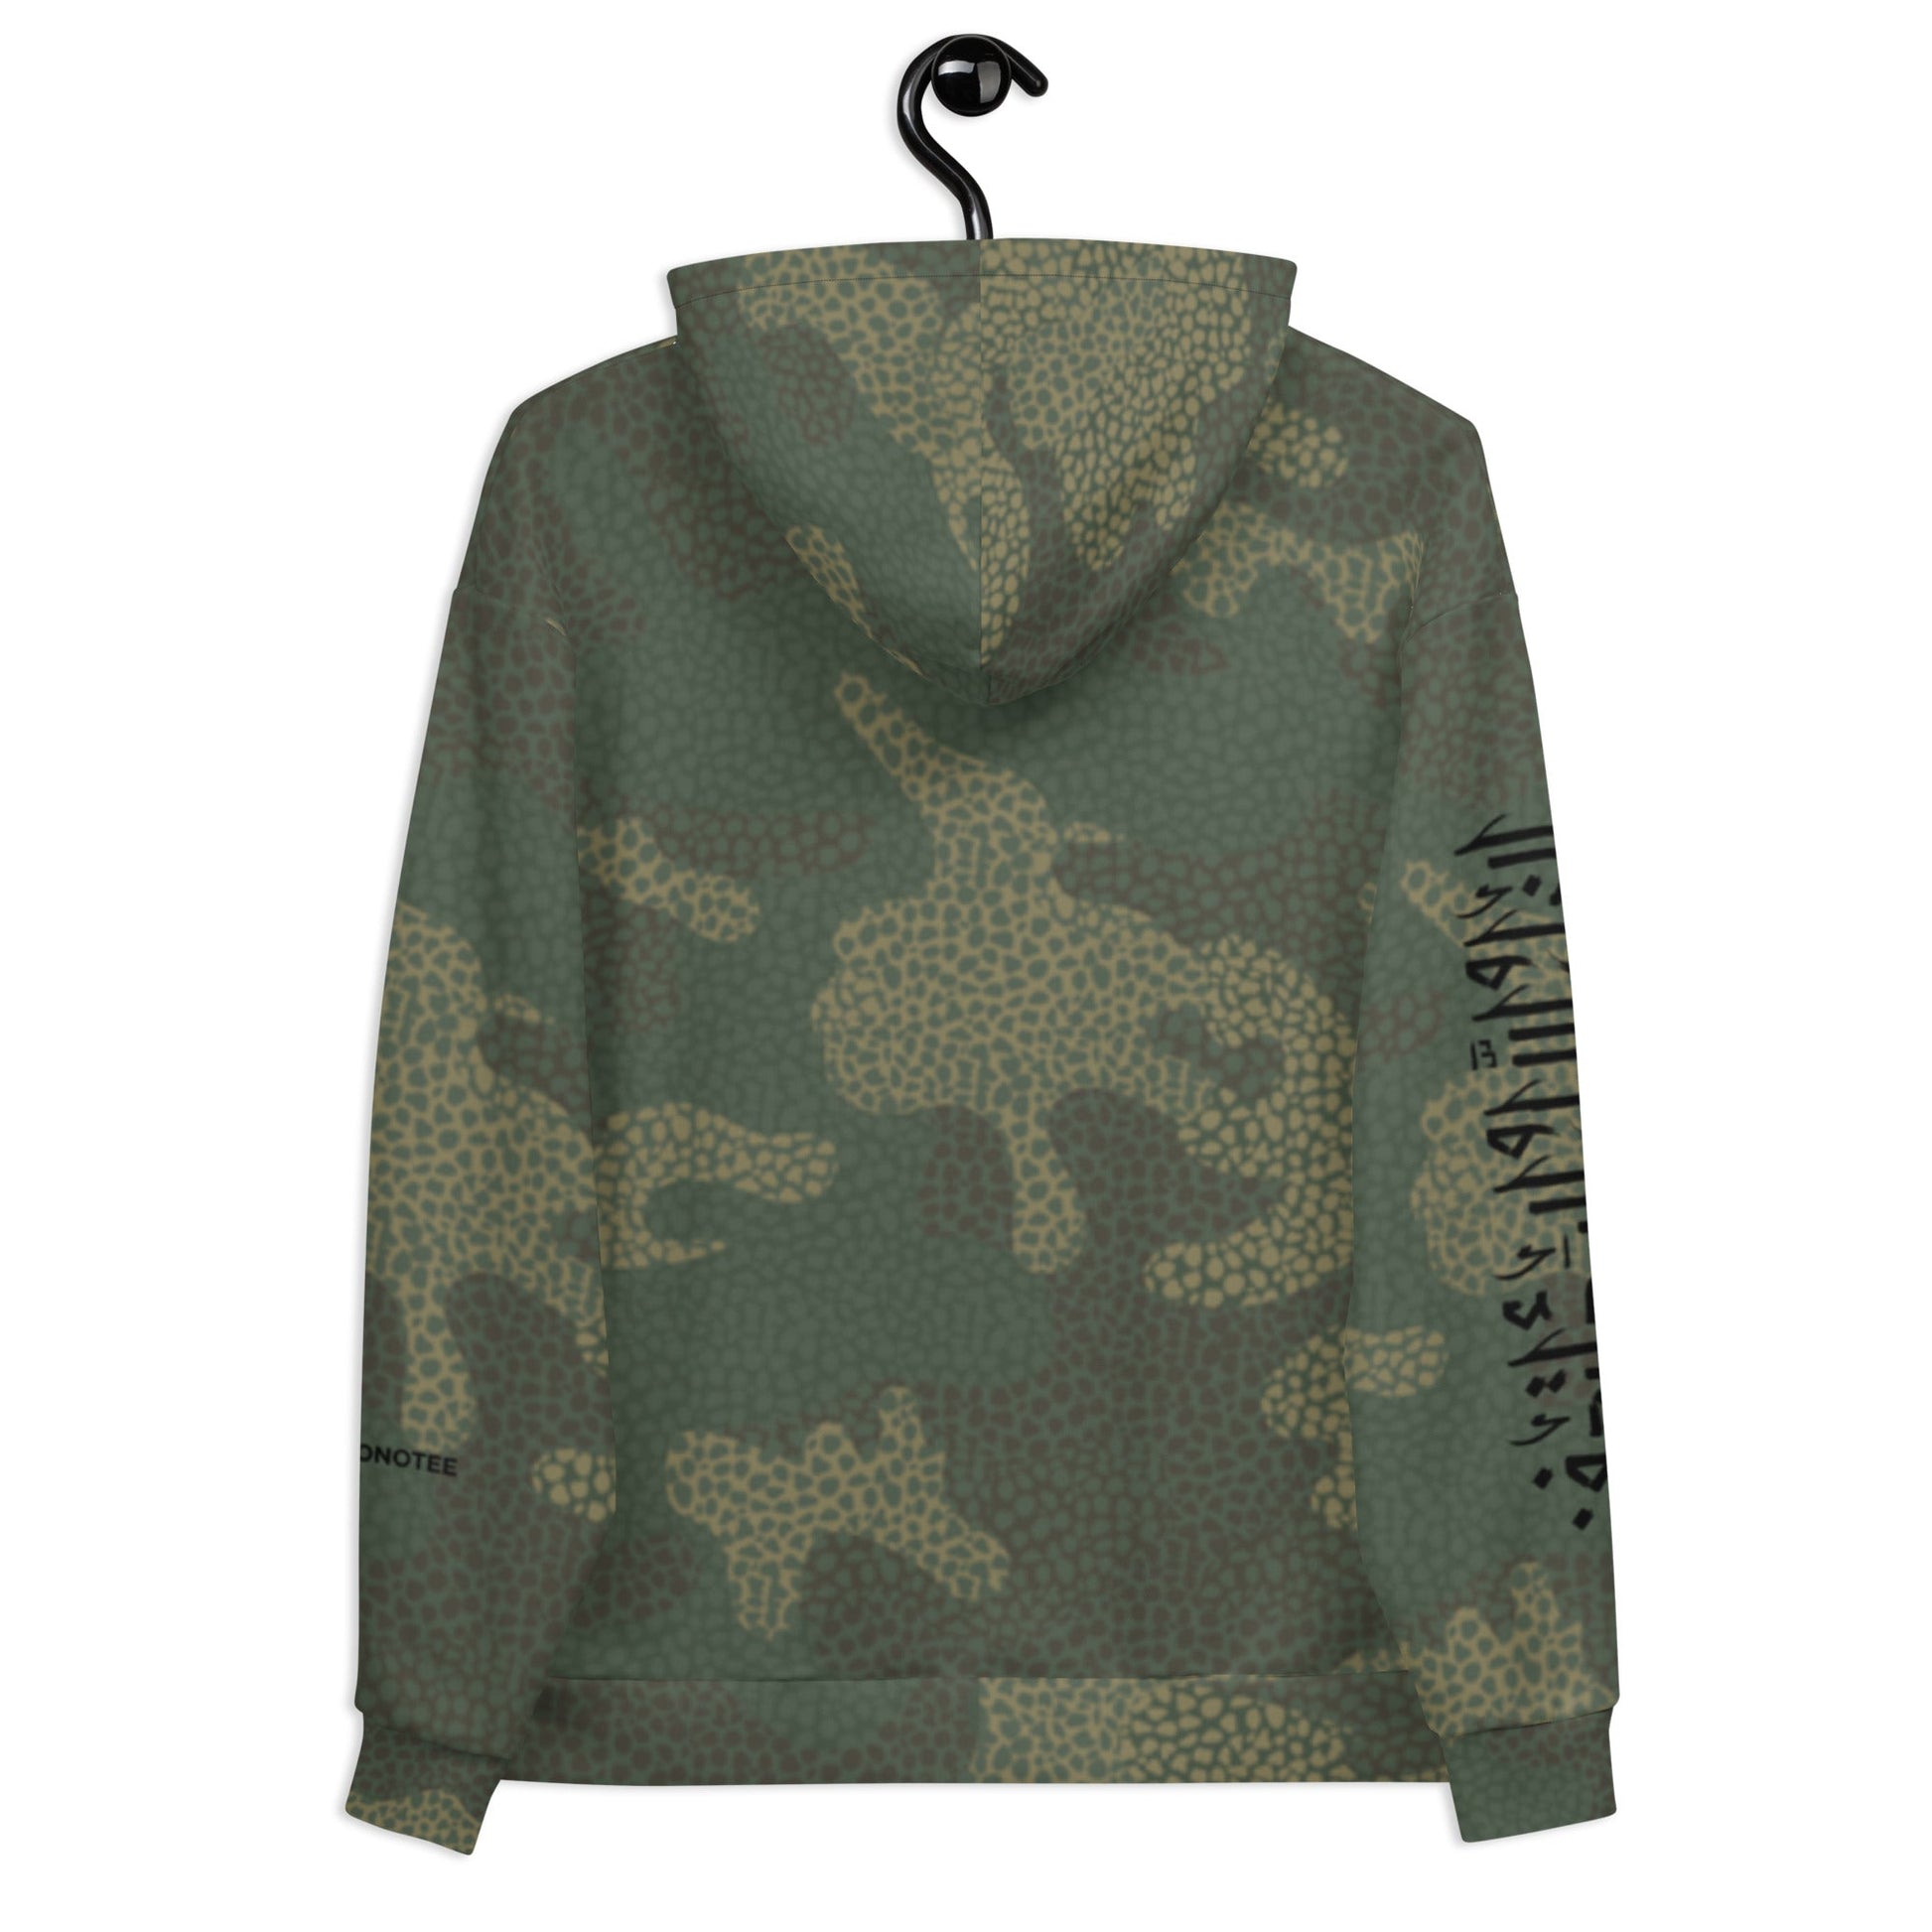 unisex-all-over-print-hoodie-alkhail-camouflage-forest